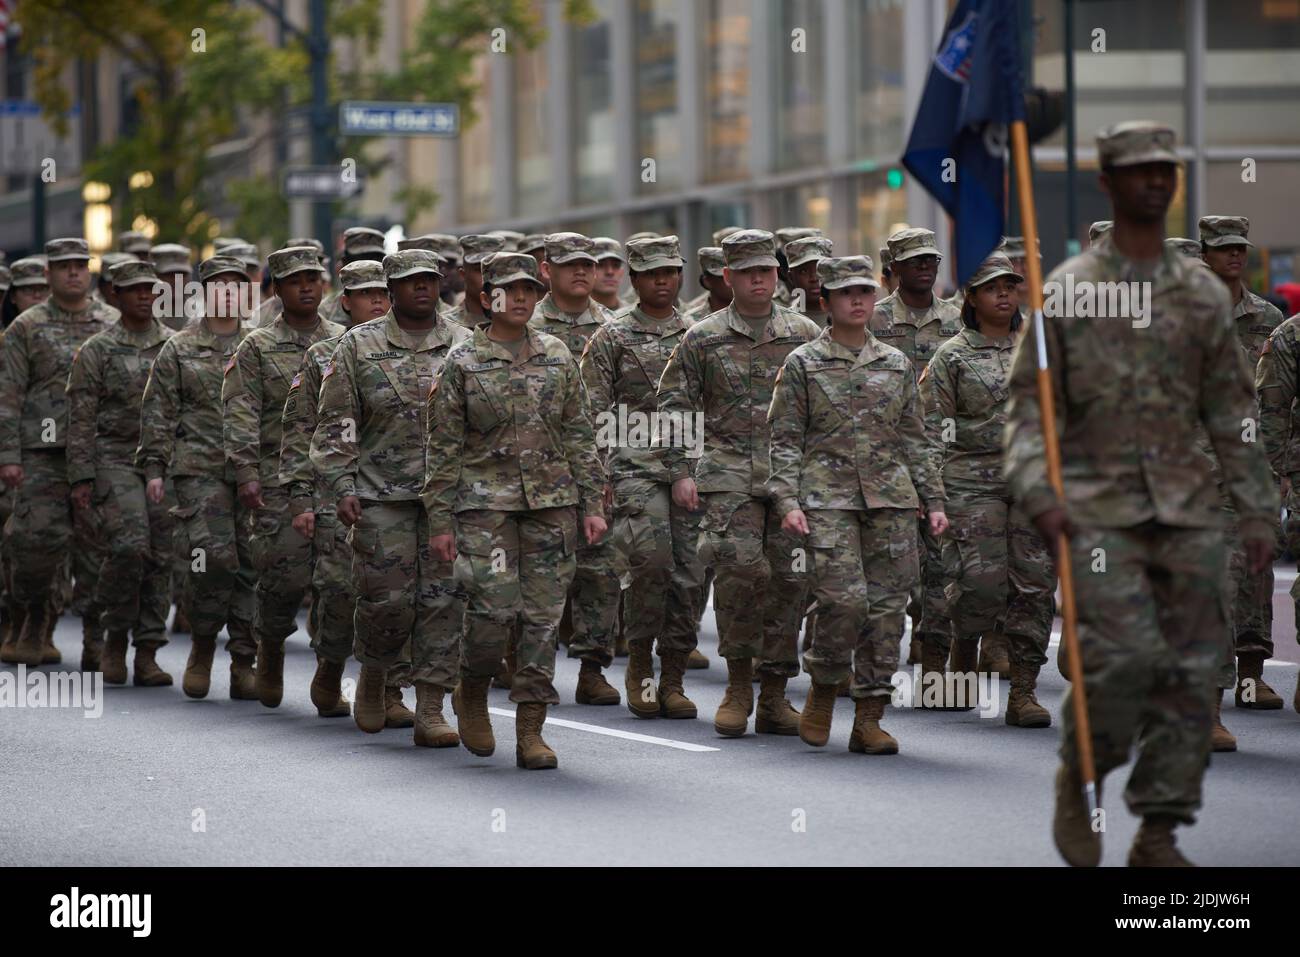 Manhattan, New York,USA - November 11. 2019: 77th Sustainment Brigade. Soldiers marching on Fifth Avenue in NYC. US Military Infantry holding flags an Stock Photo